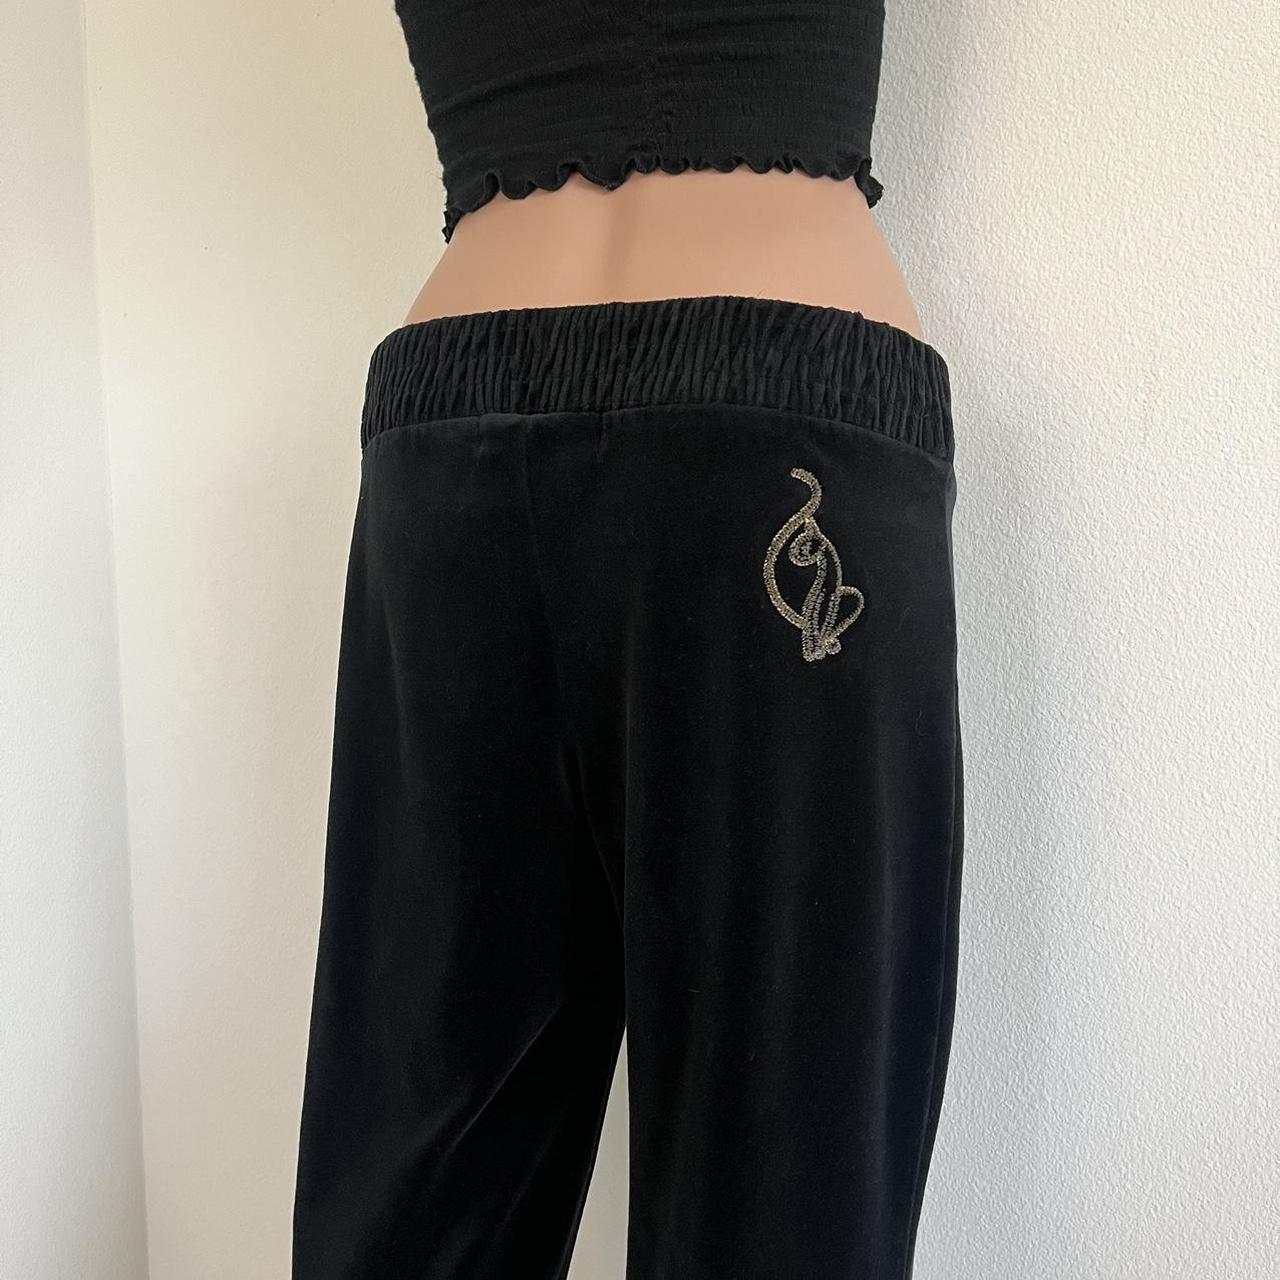 Classic early 2000’s low rise sweat pants with the